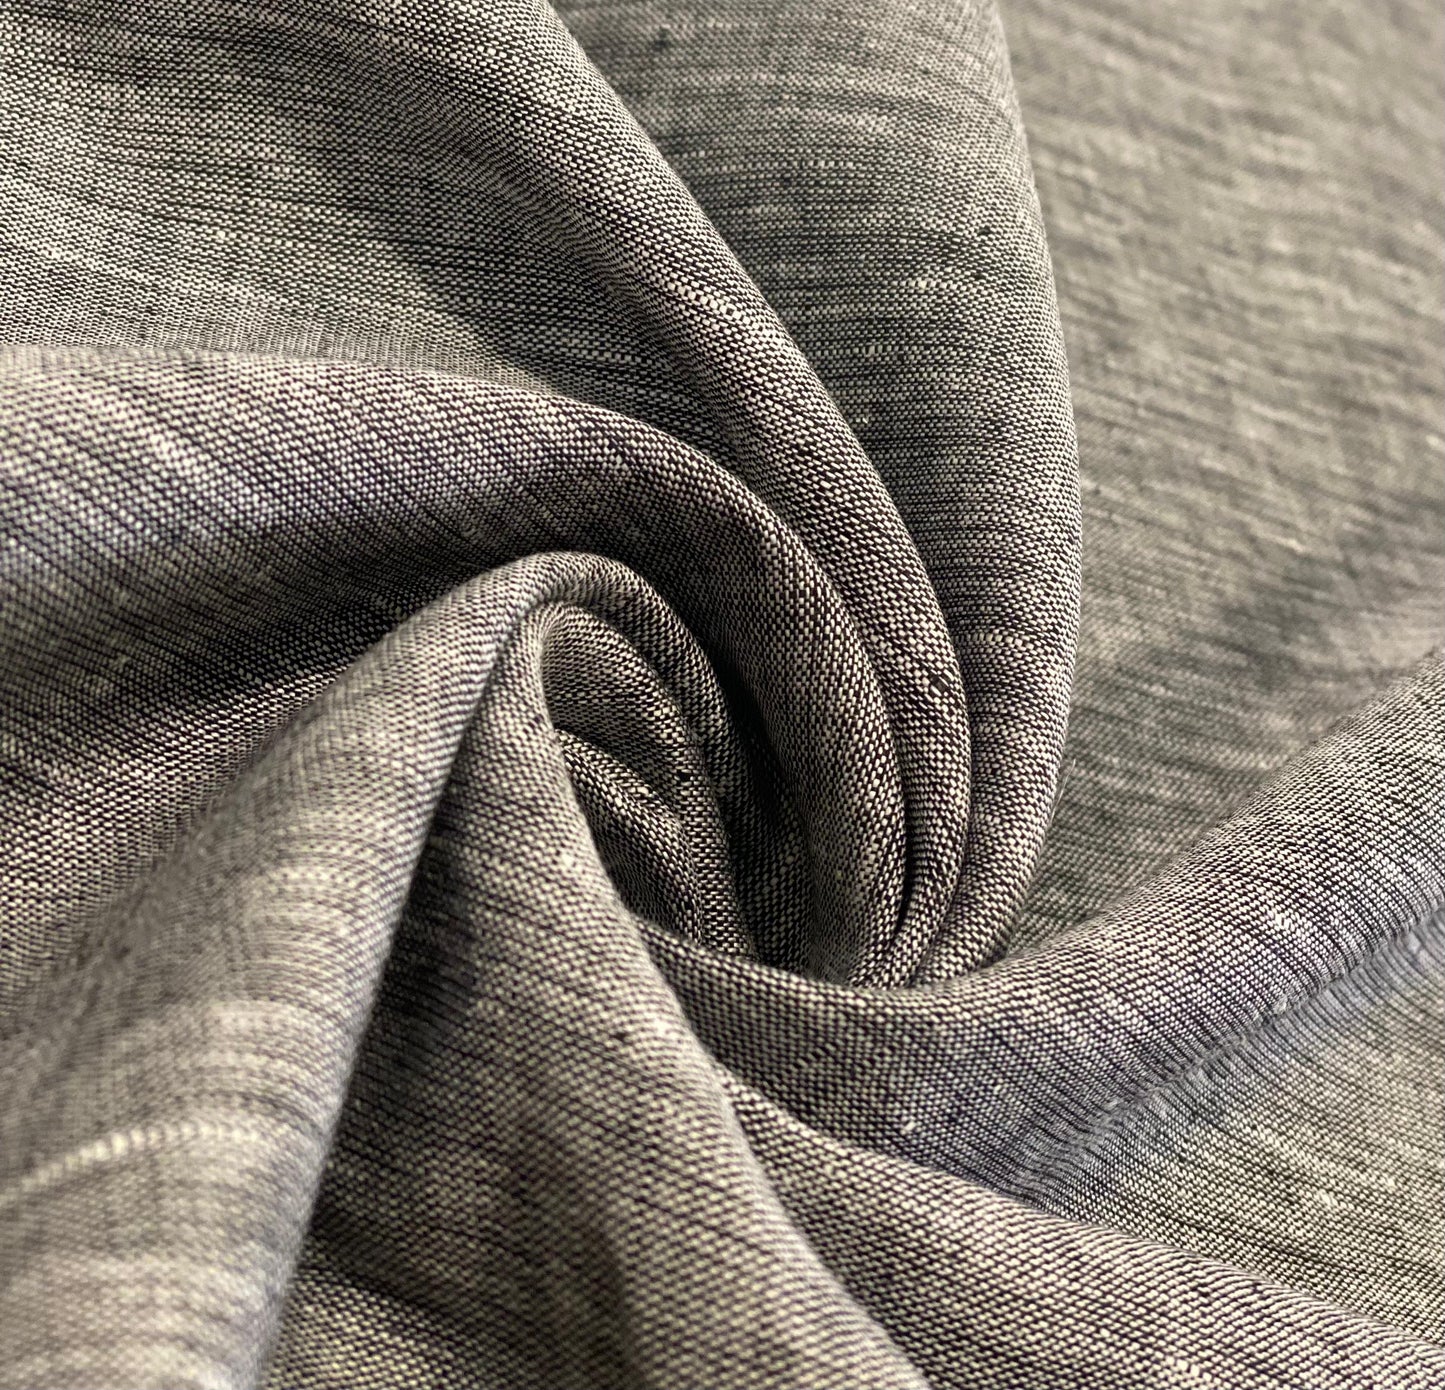 Charcoal Black White Solid Colour - Dyed Premium Linen Fabric OL-013